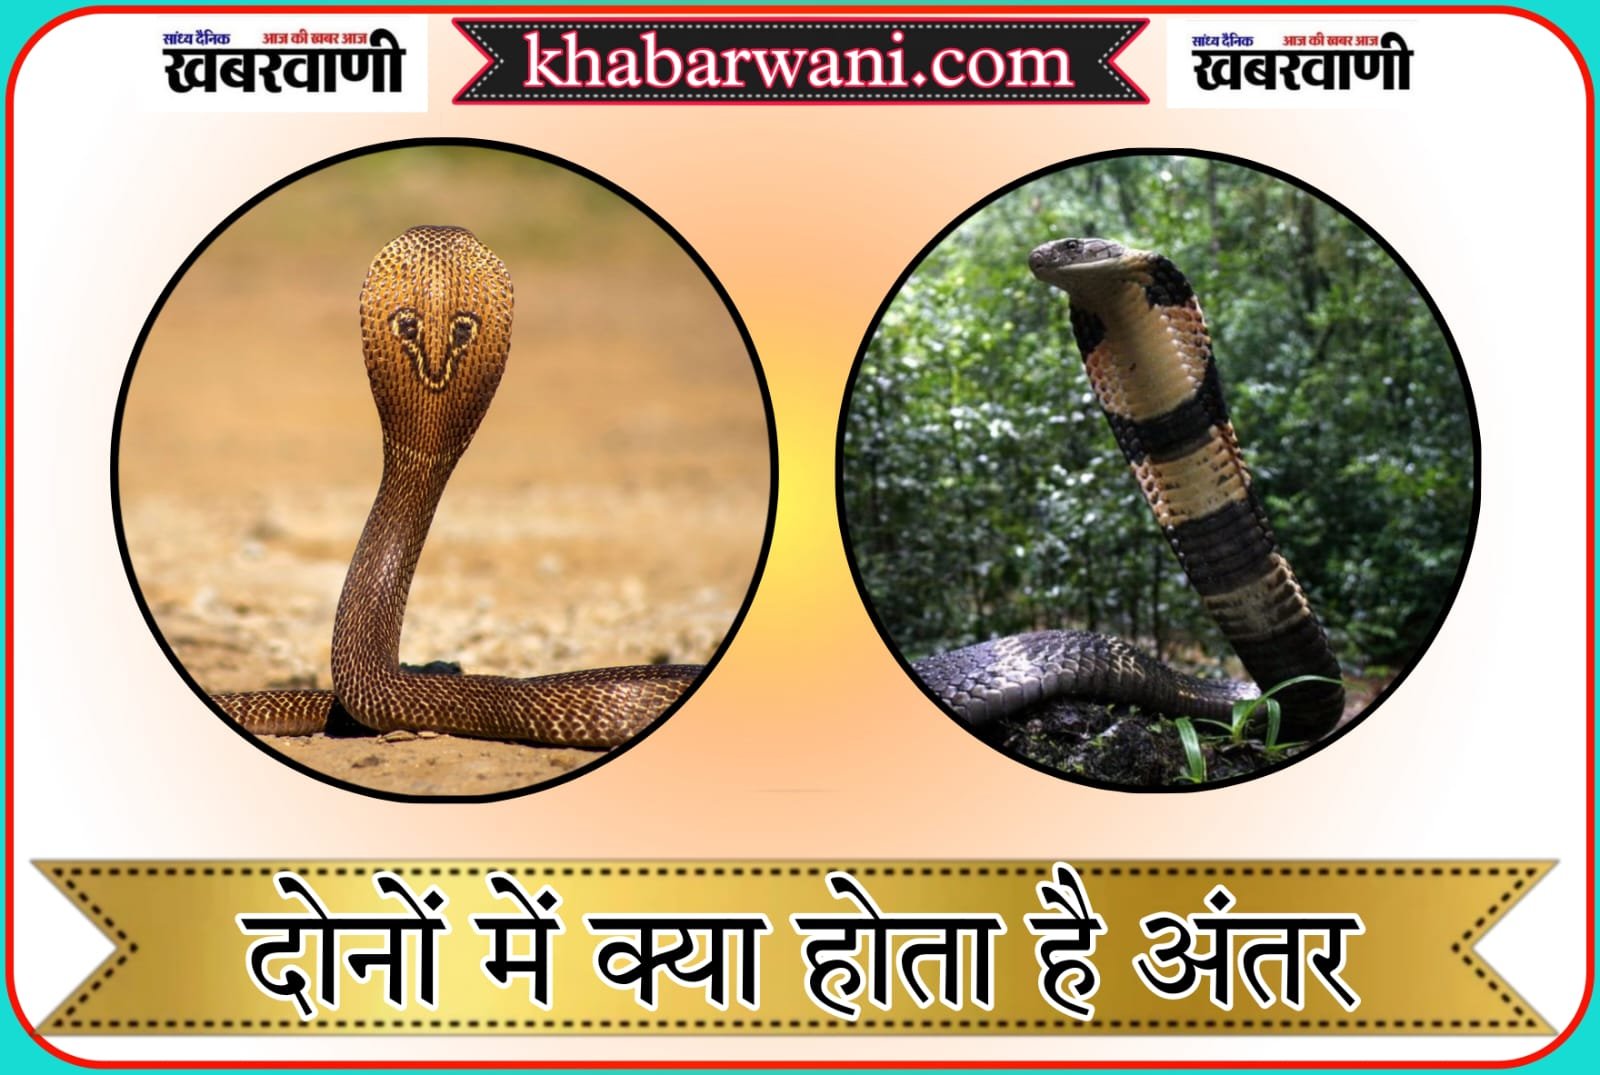 Know what is the difference between Indian Cobra and King Cobra